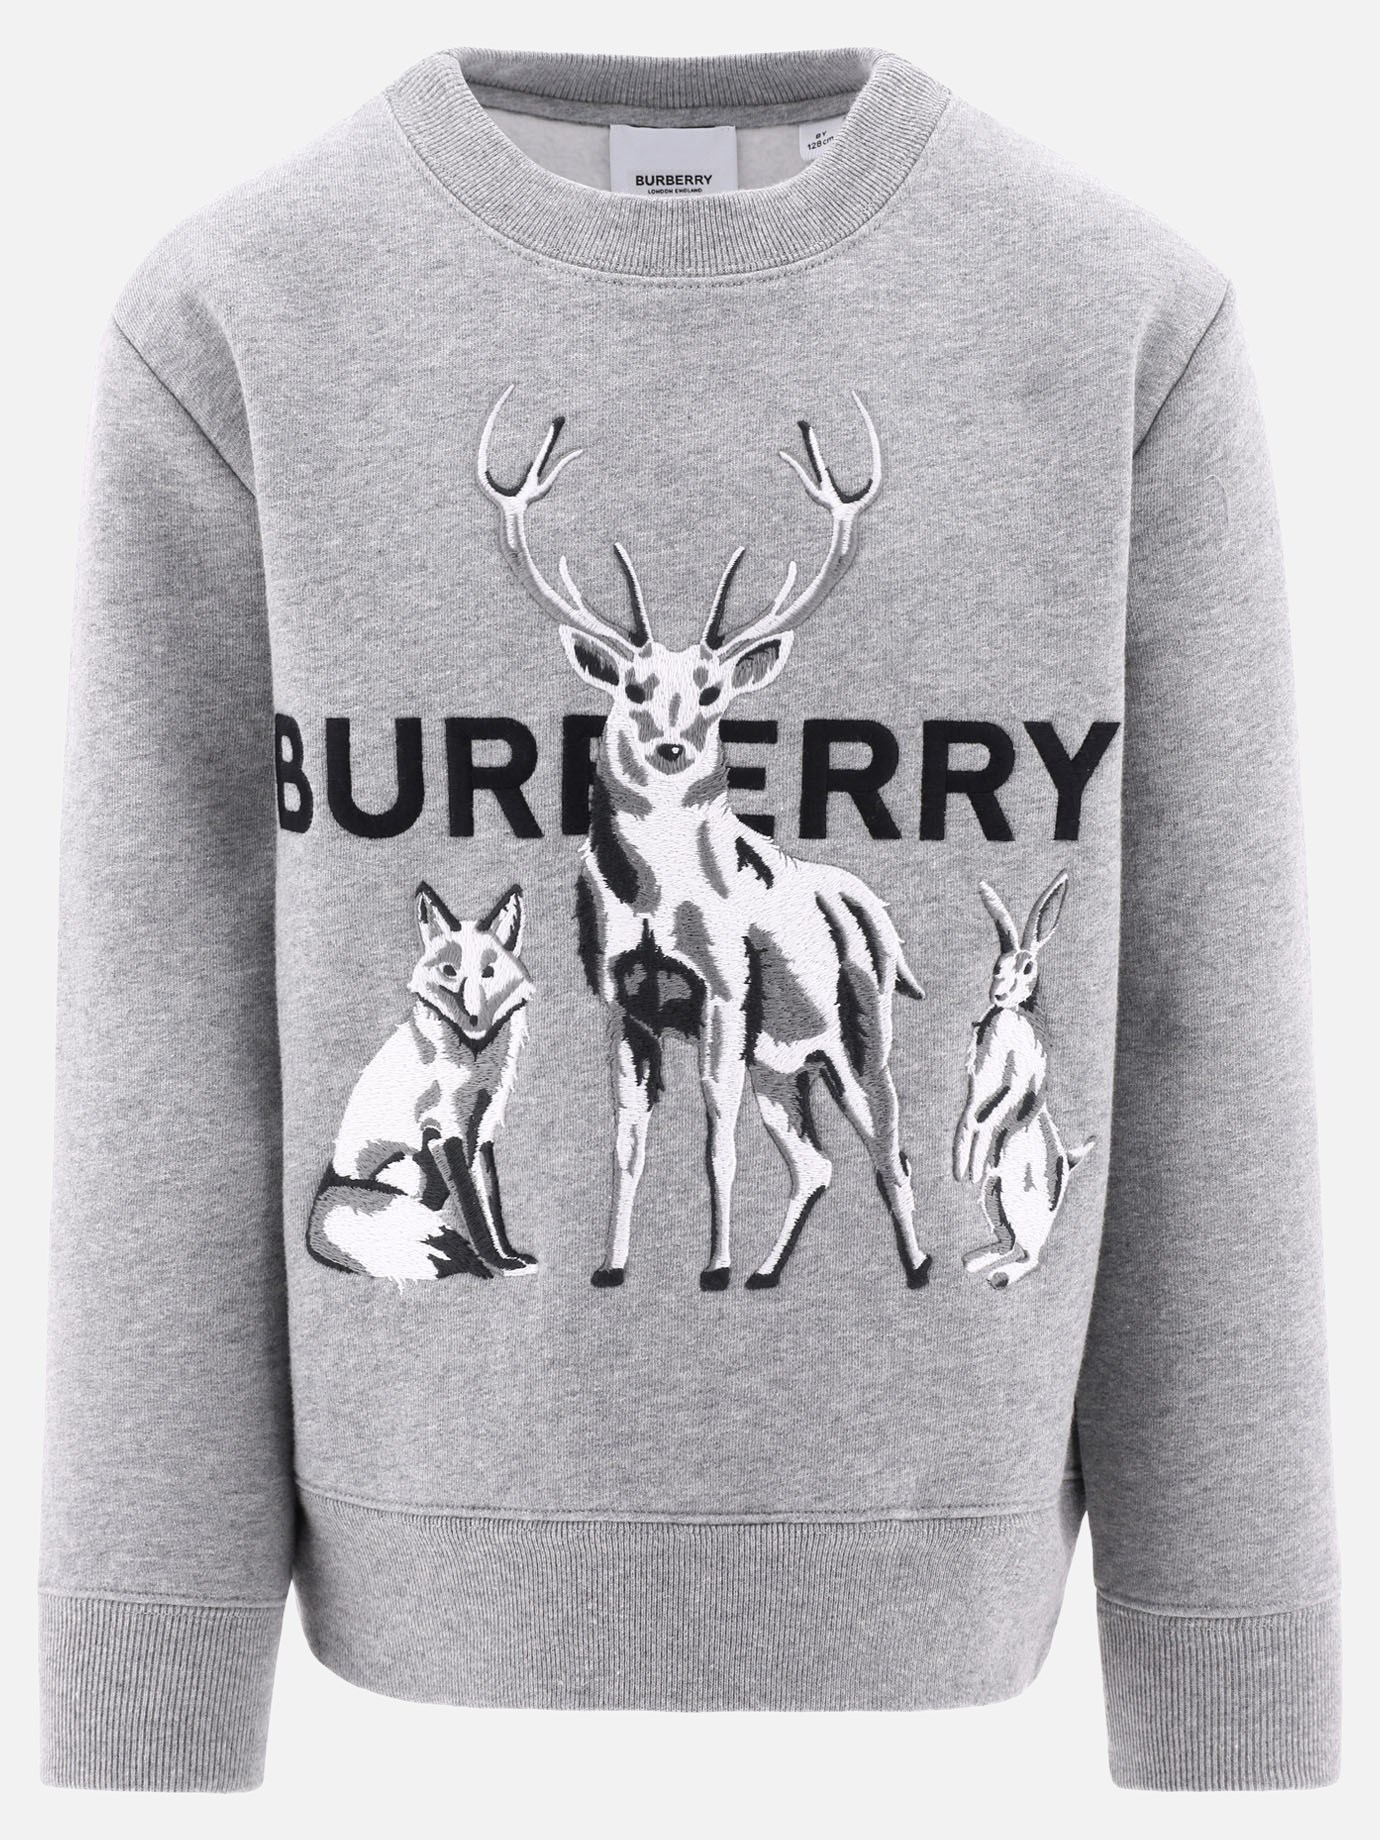  Stag  sweaterby Burberry Kids - 5